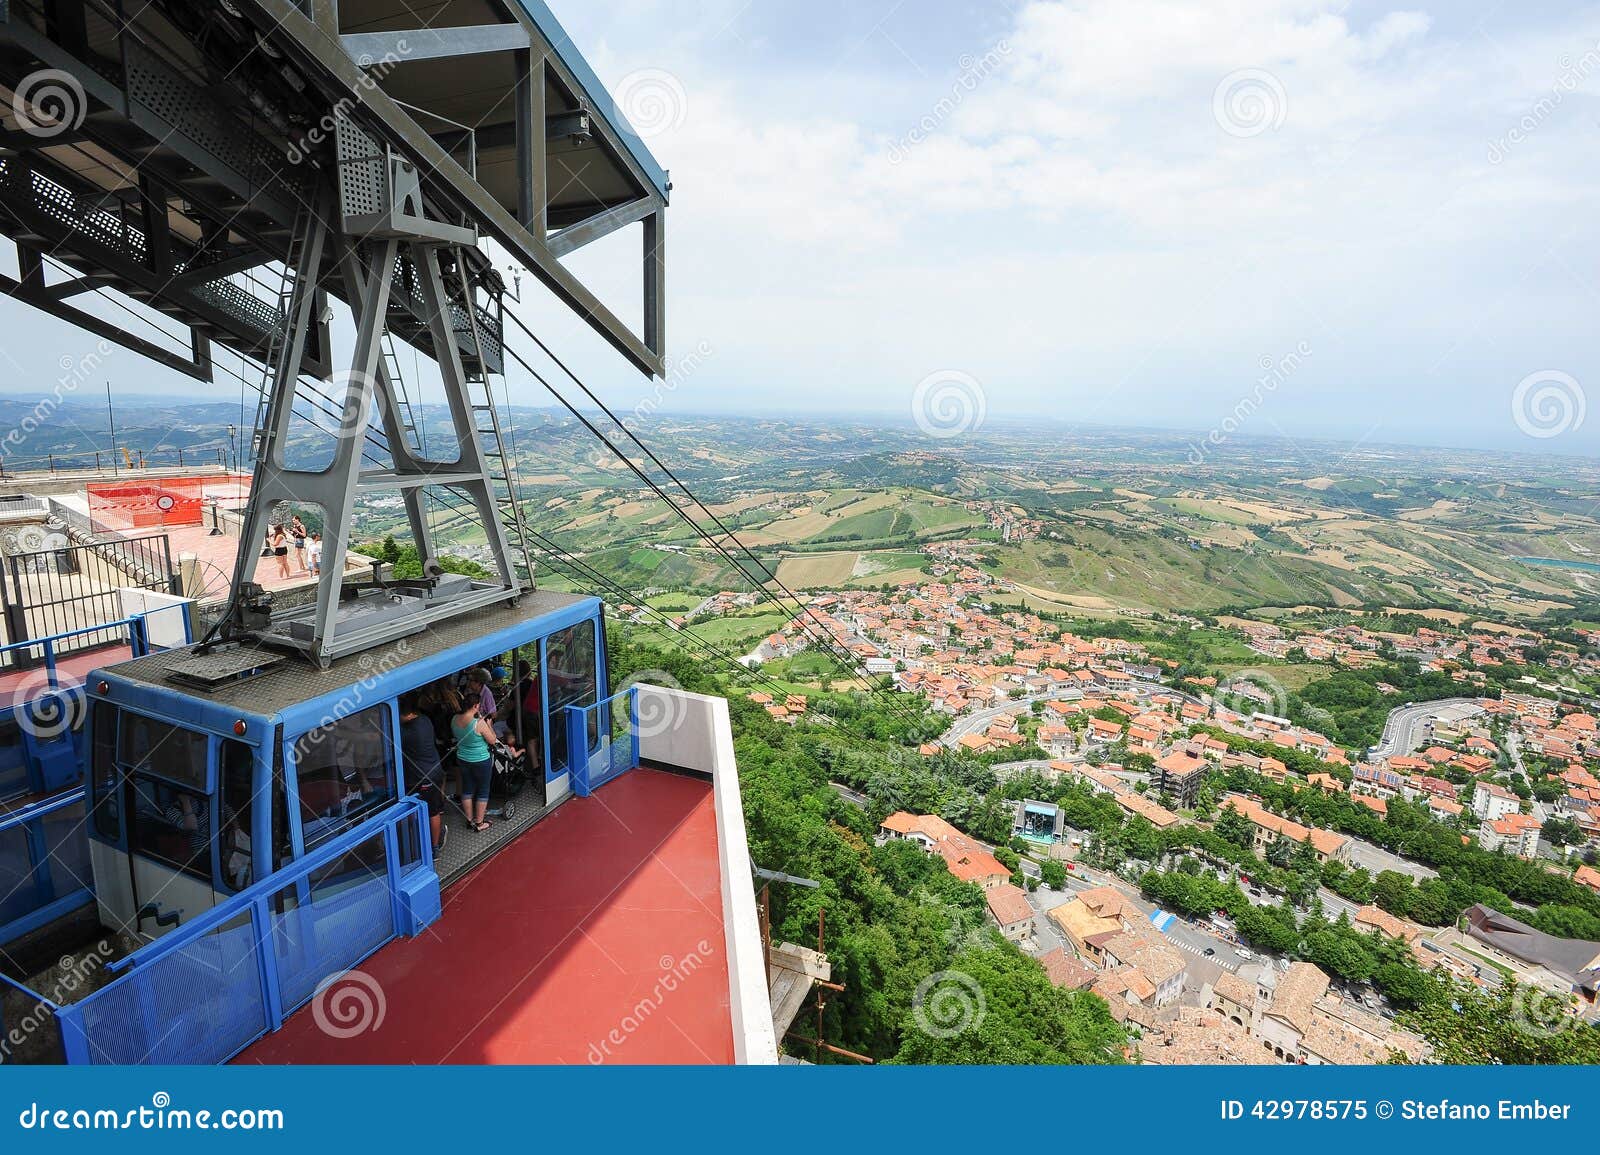 Cable Way To Borgo Maggiore on San Marino Editorial Image - Image of  country, typical: 42978575